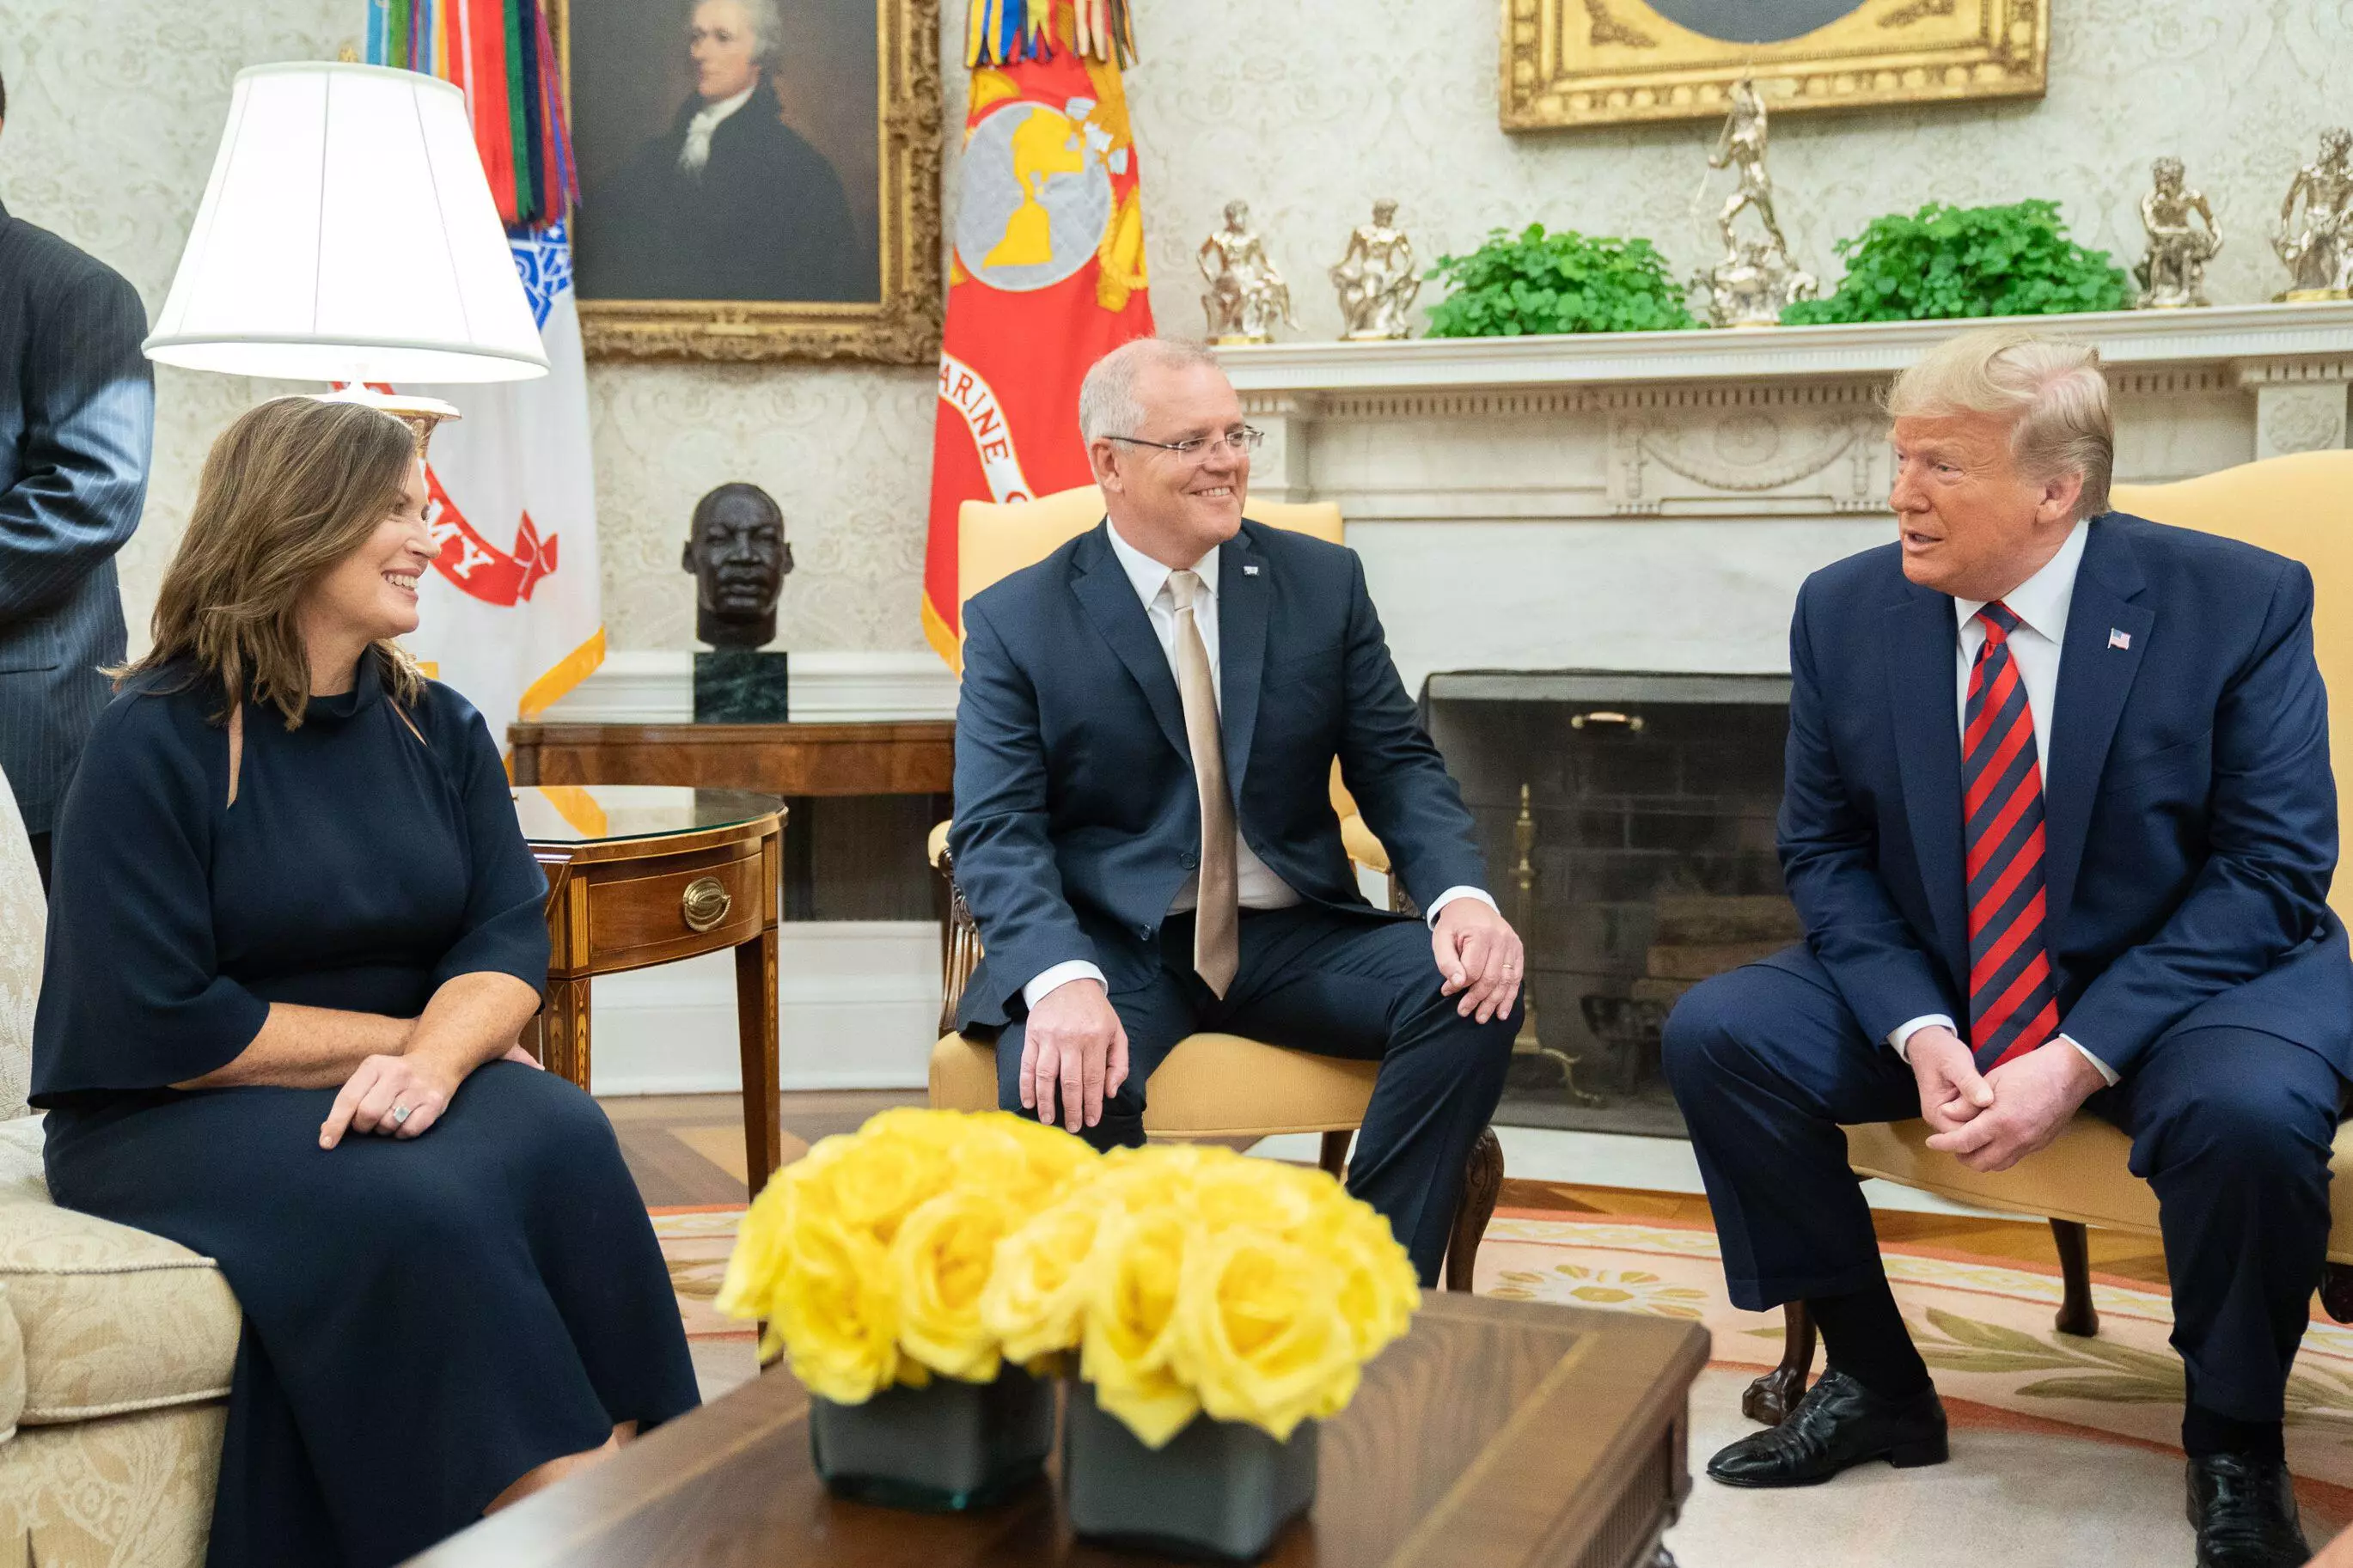 Jenny and Scott Morrison with then President Trump in 2019.